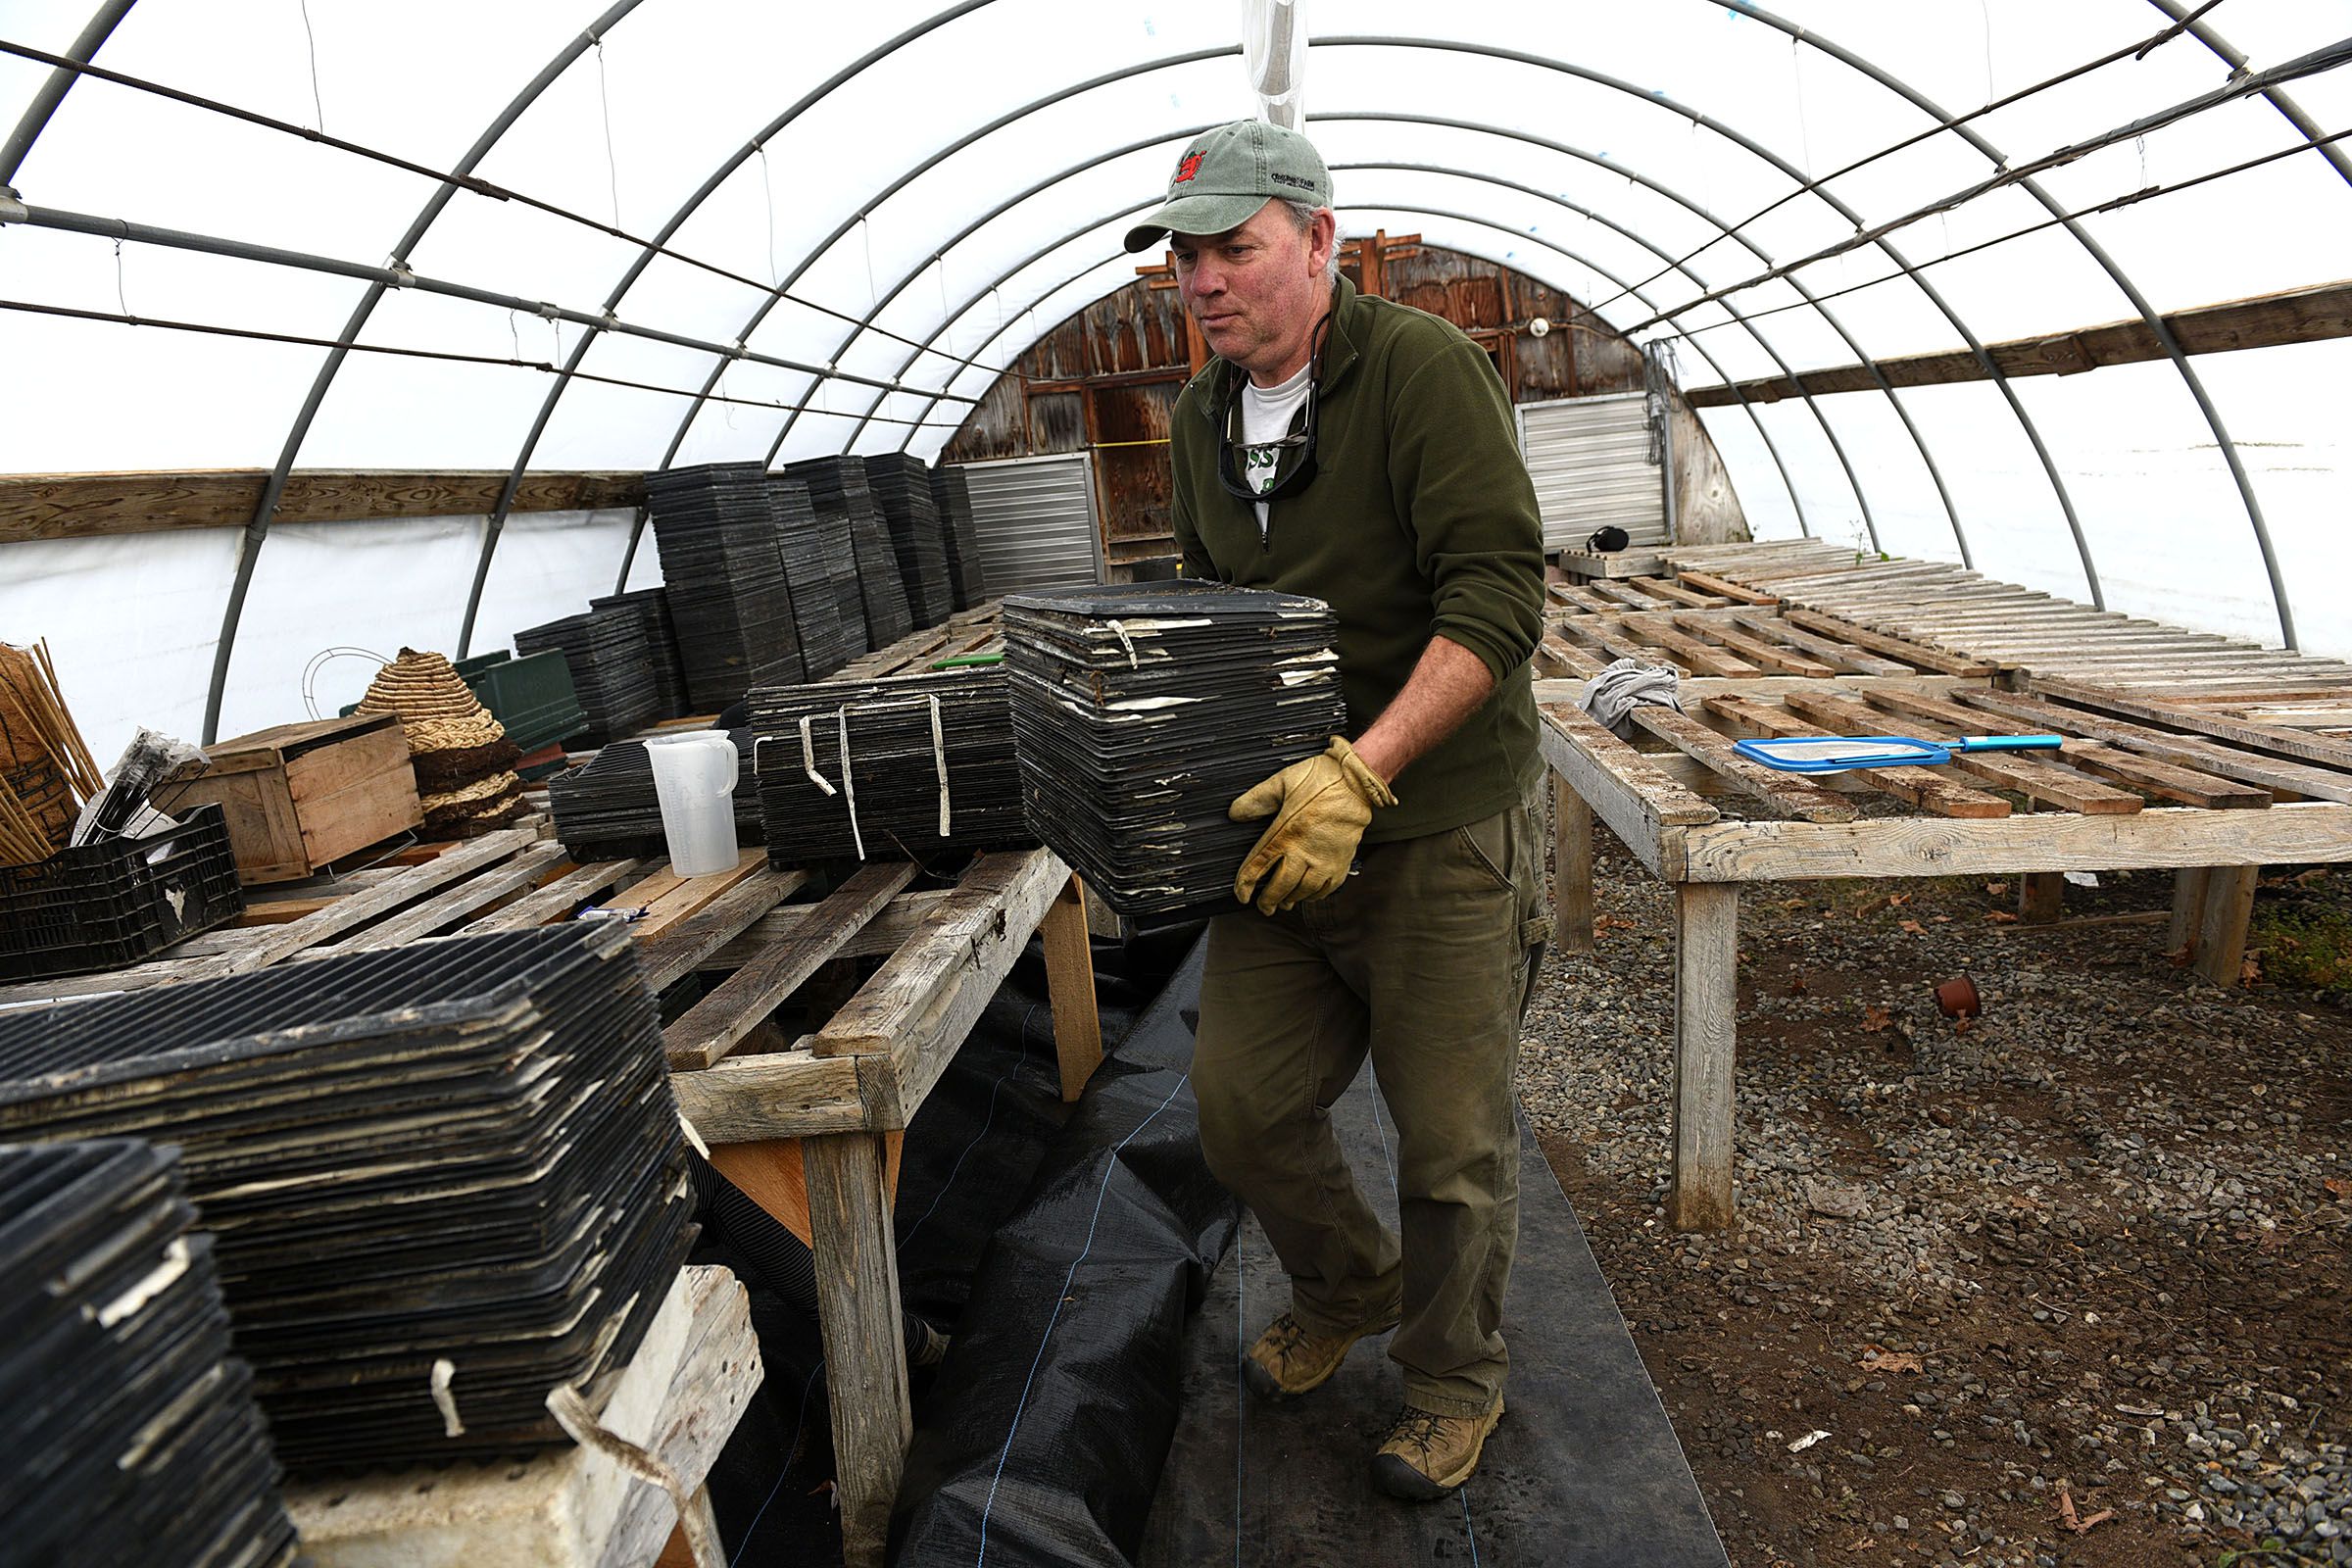 Tim Taylor,of Crossroad Farm in Post Mills, Vt. works in one of the farm's greenhouses on Dec. 1, 2016. (Valley News - Jennifer Hauck) Copyright Valley News. May not be reprinted or used online without permission. Send requests to permission@vnews.com.